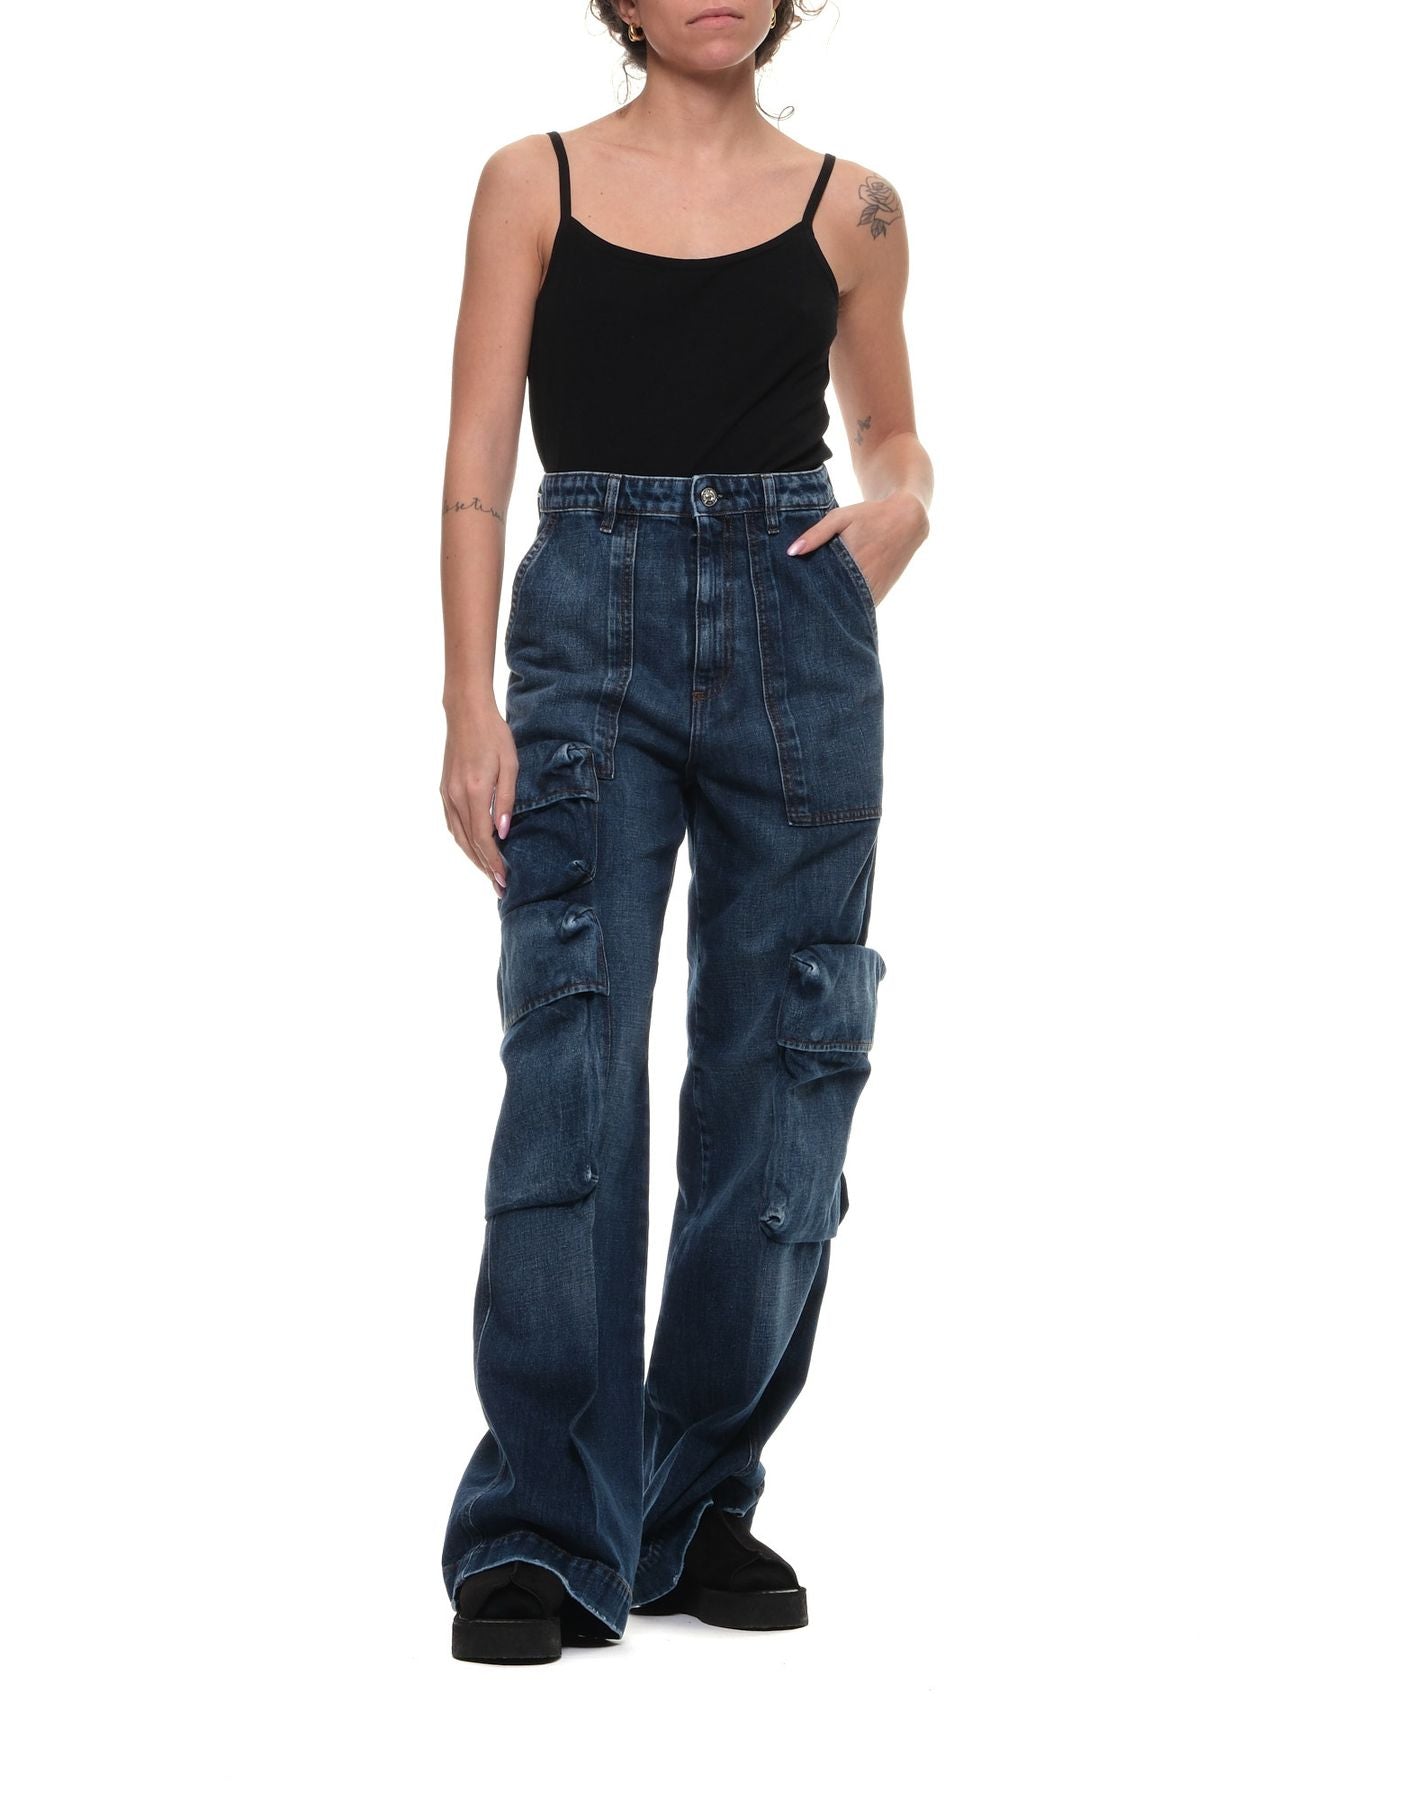 Jeans Woman Madrid Mad04 Dll9175 NINE:INTHE:MORNING